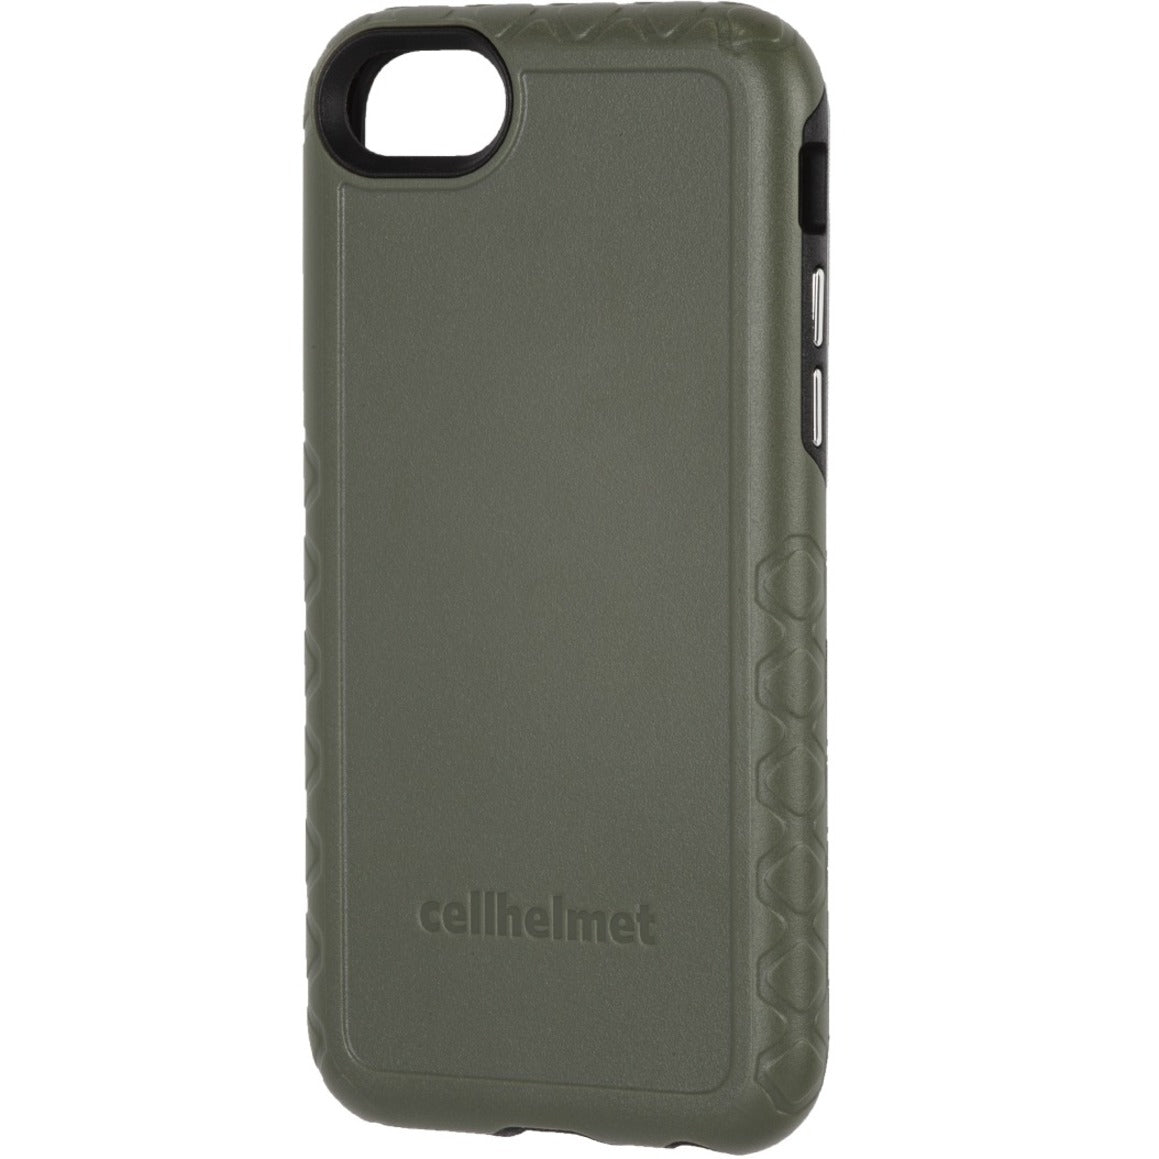 Cellhelmet CHPCFO-I8-ODG Fortitude Series for Apple iPhone SE (2020) / 6 / 7 / 8 - Olive D Green, Rugged Case for iPhone, Impact Resistant